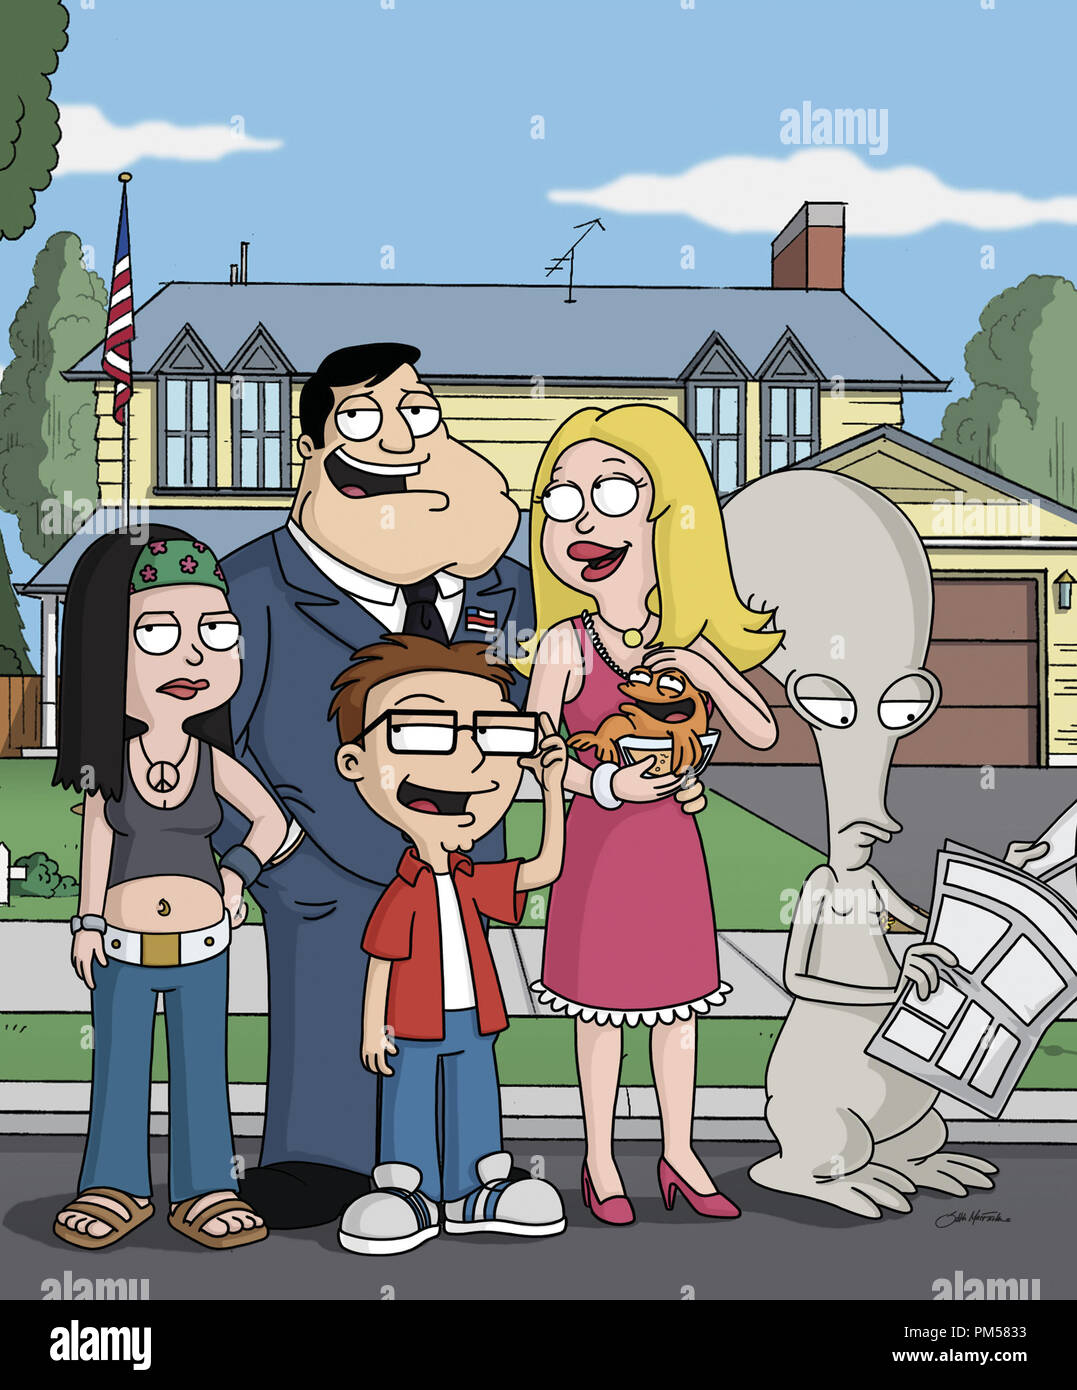 Film Still / Publicity Still from "American Dad!" Hayley, Stan Smith,  Steve, Rodger, Francine, Klaus 2005 File Reference # 307361427THA For  Editorial Use Only - All Rights Reserved Stock Photo - Alamy